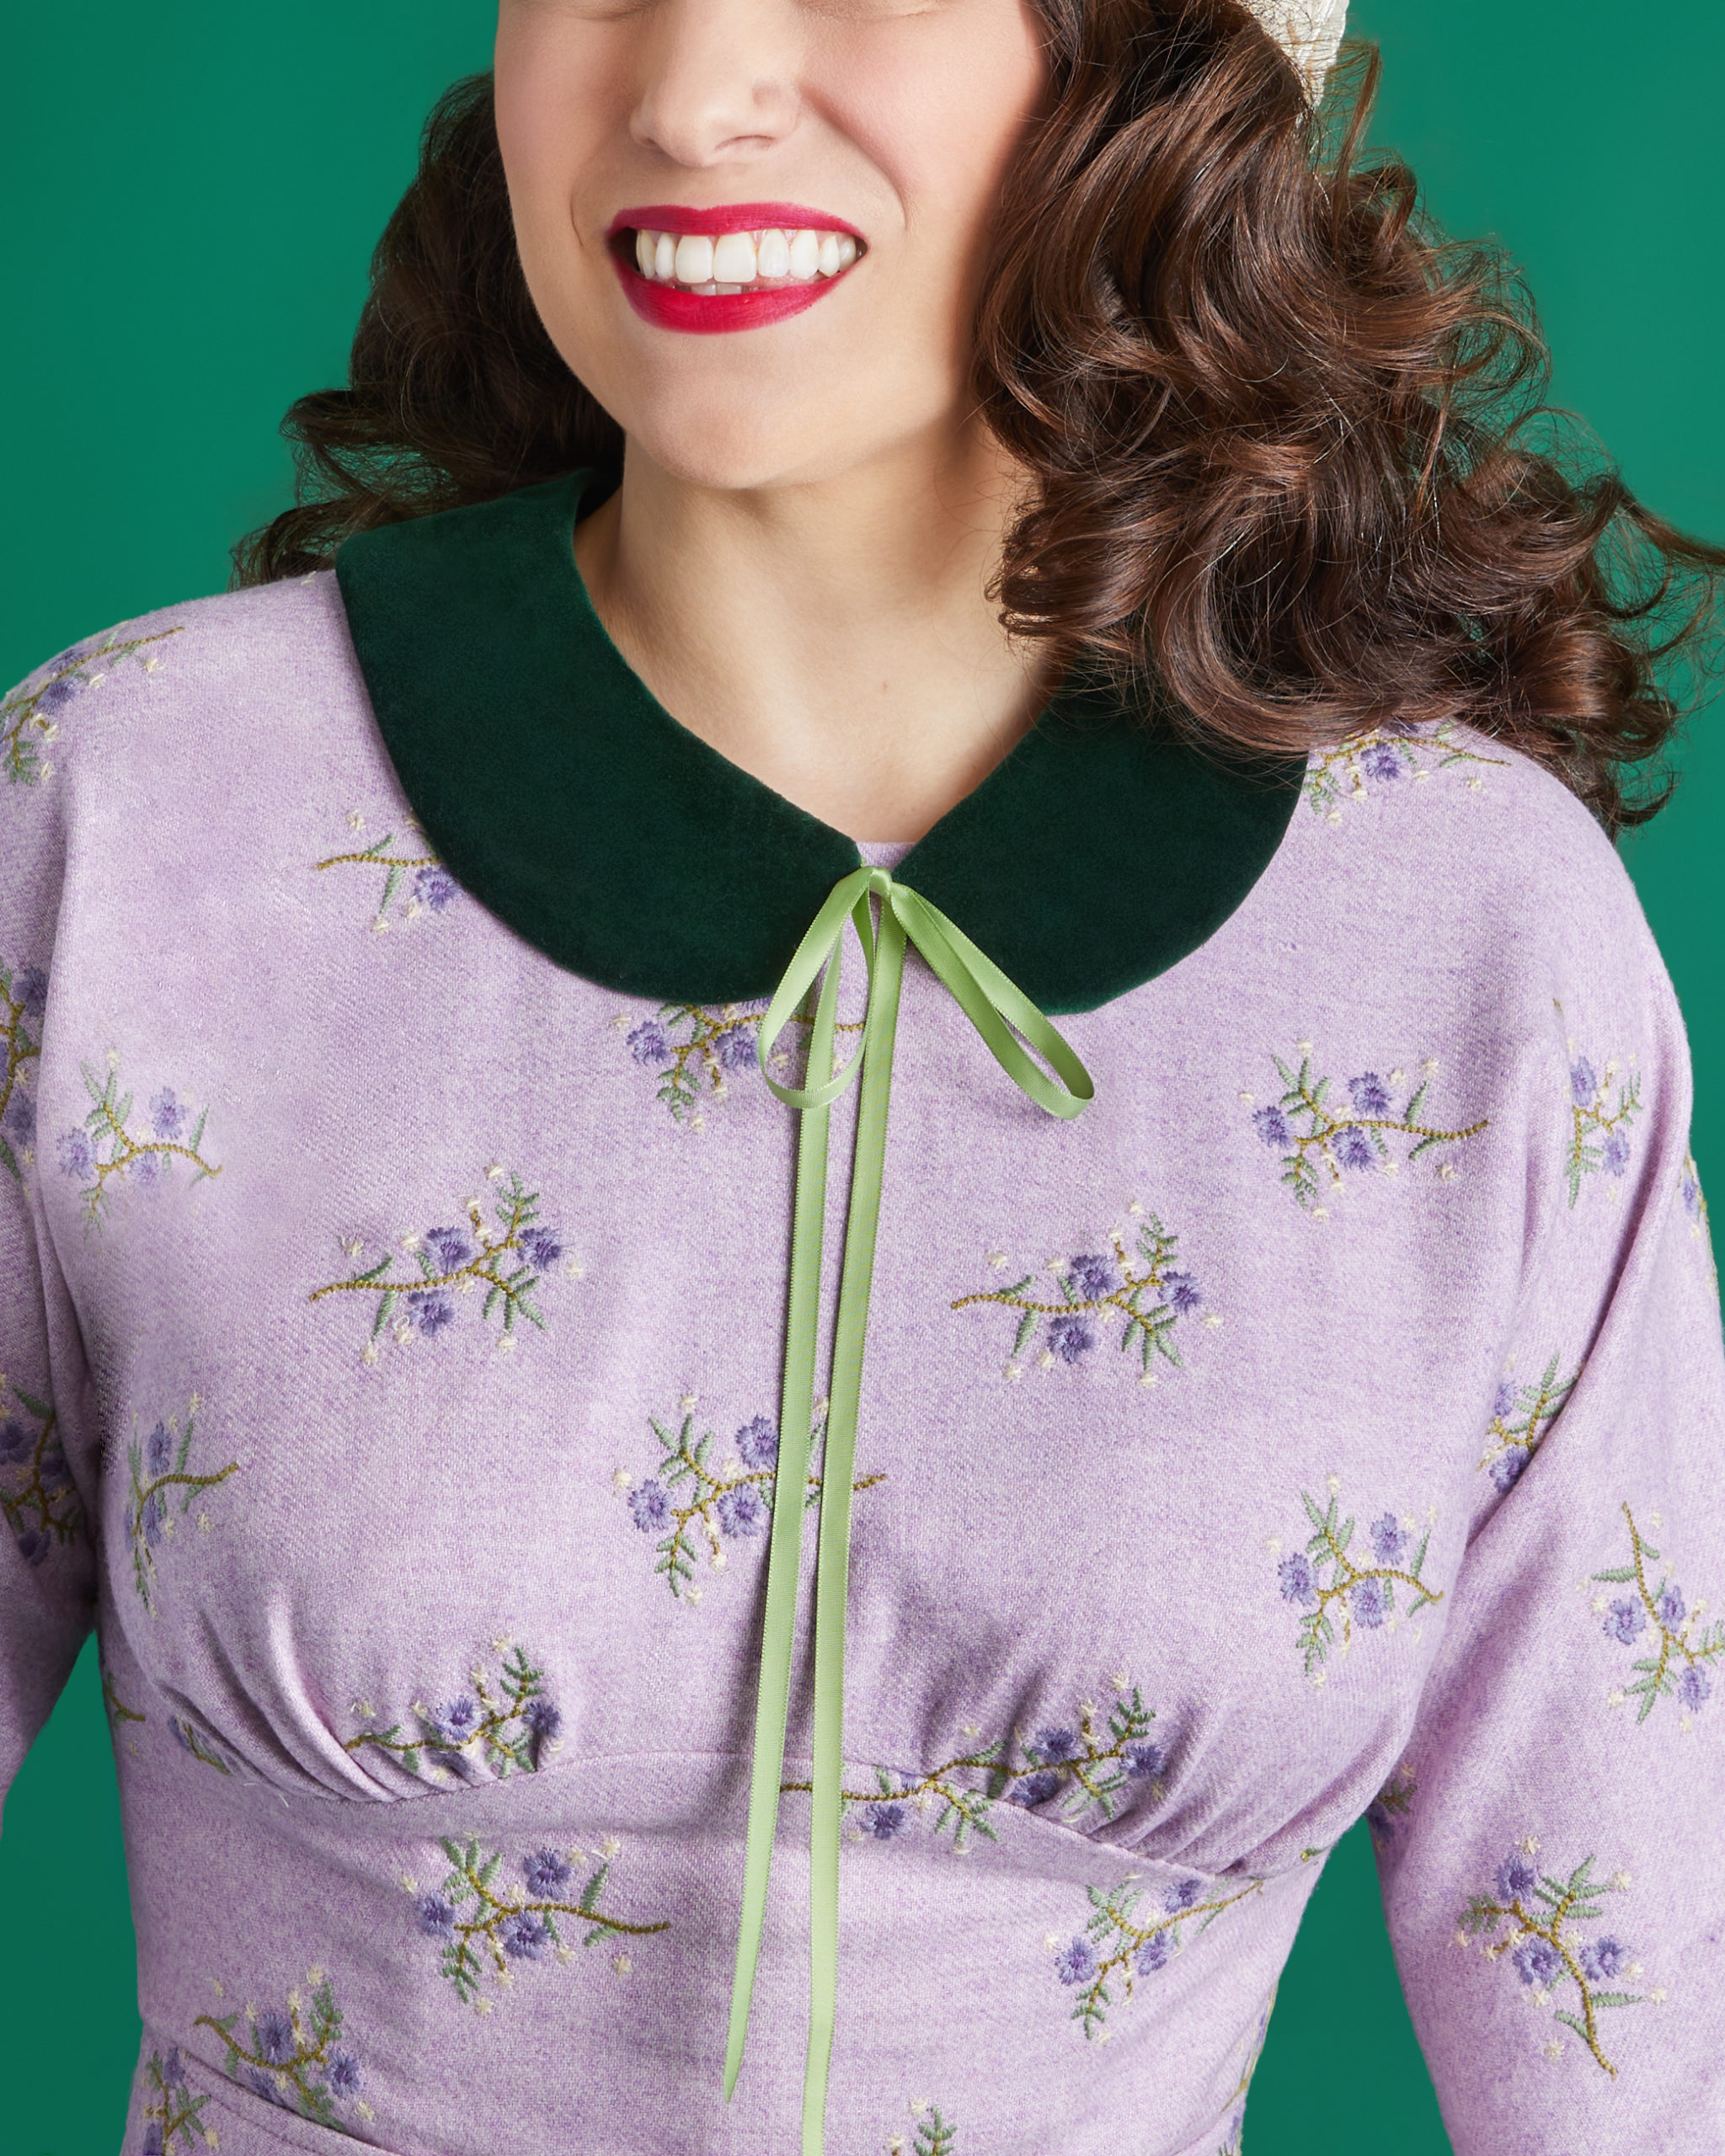 Removable Peggy Collar sewing pattern from Charm Patterns